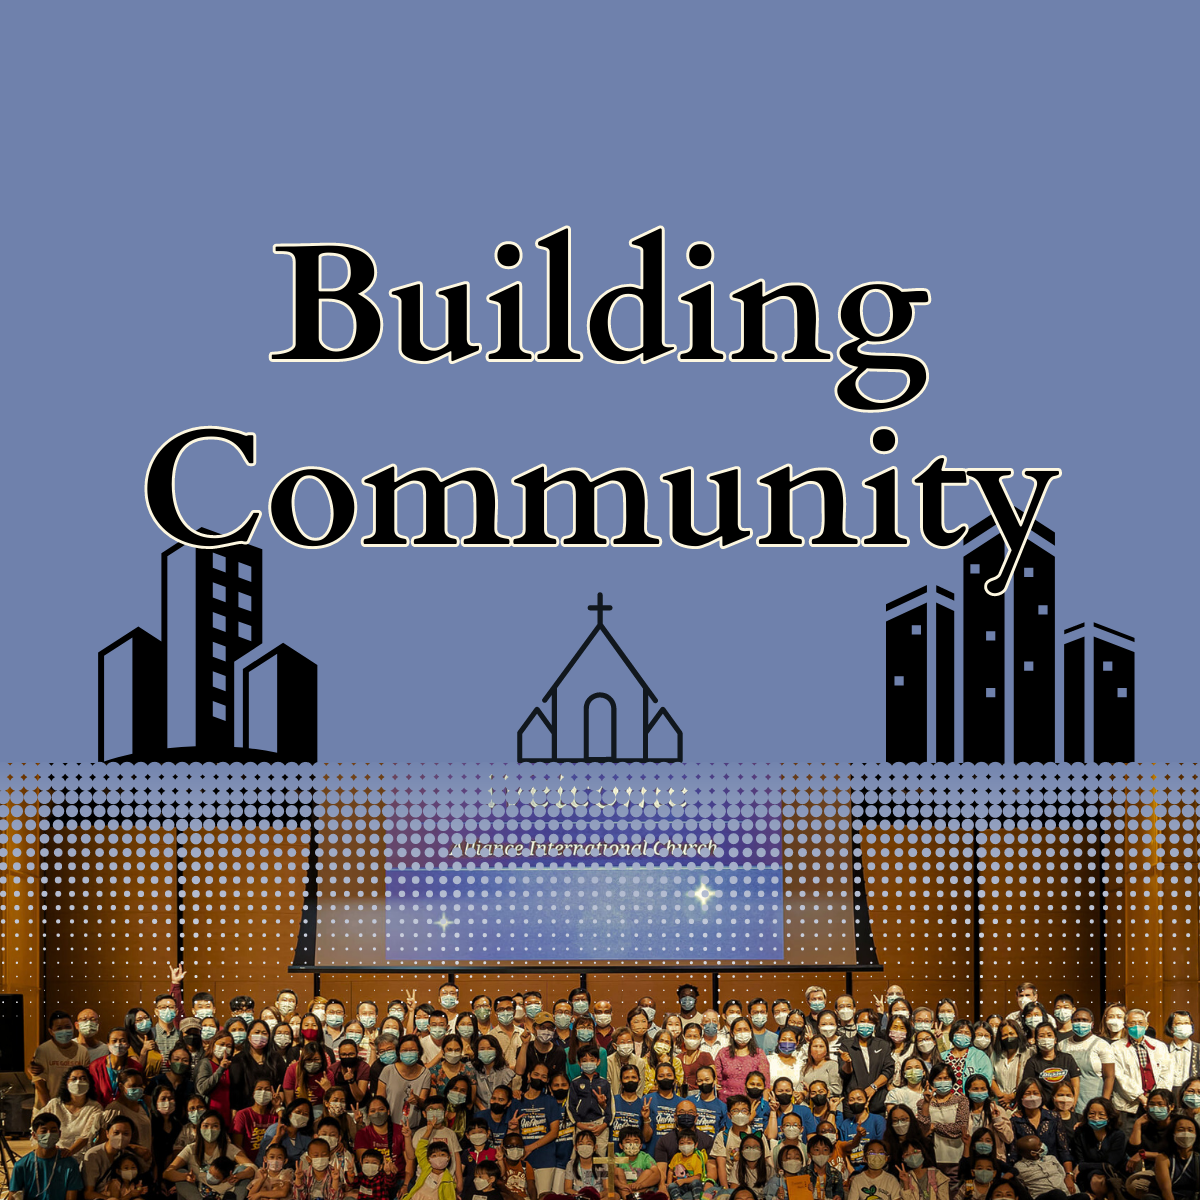 Barriers to Community: Fear